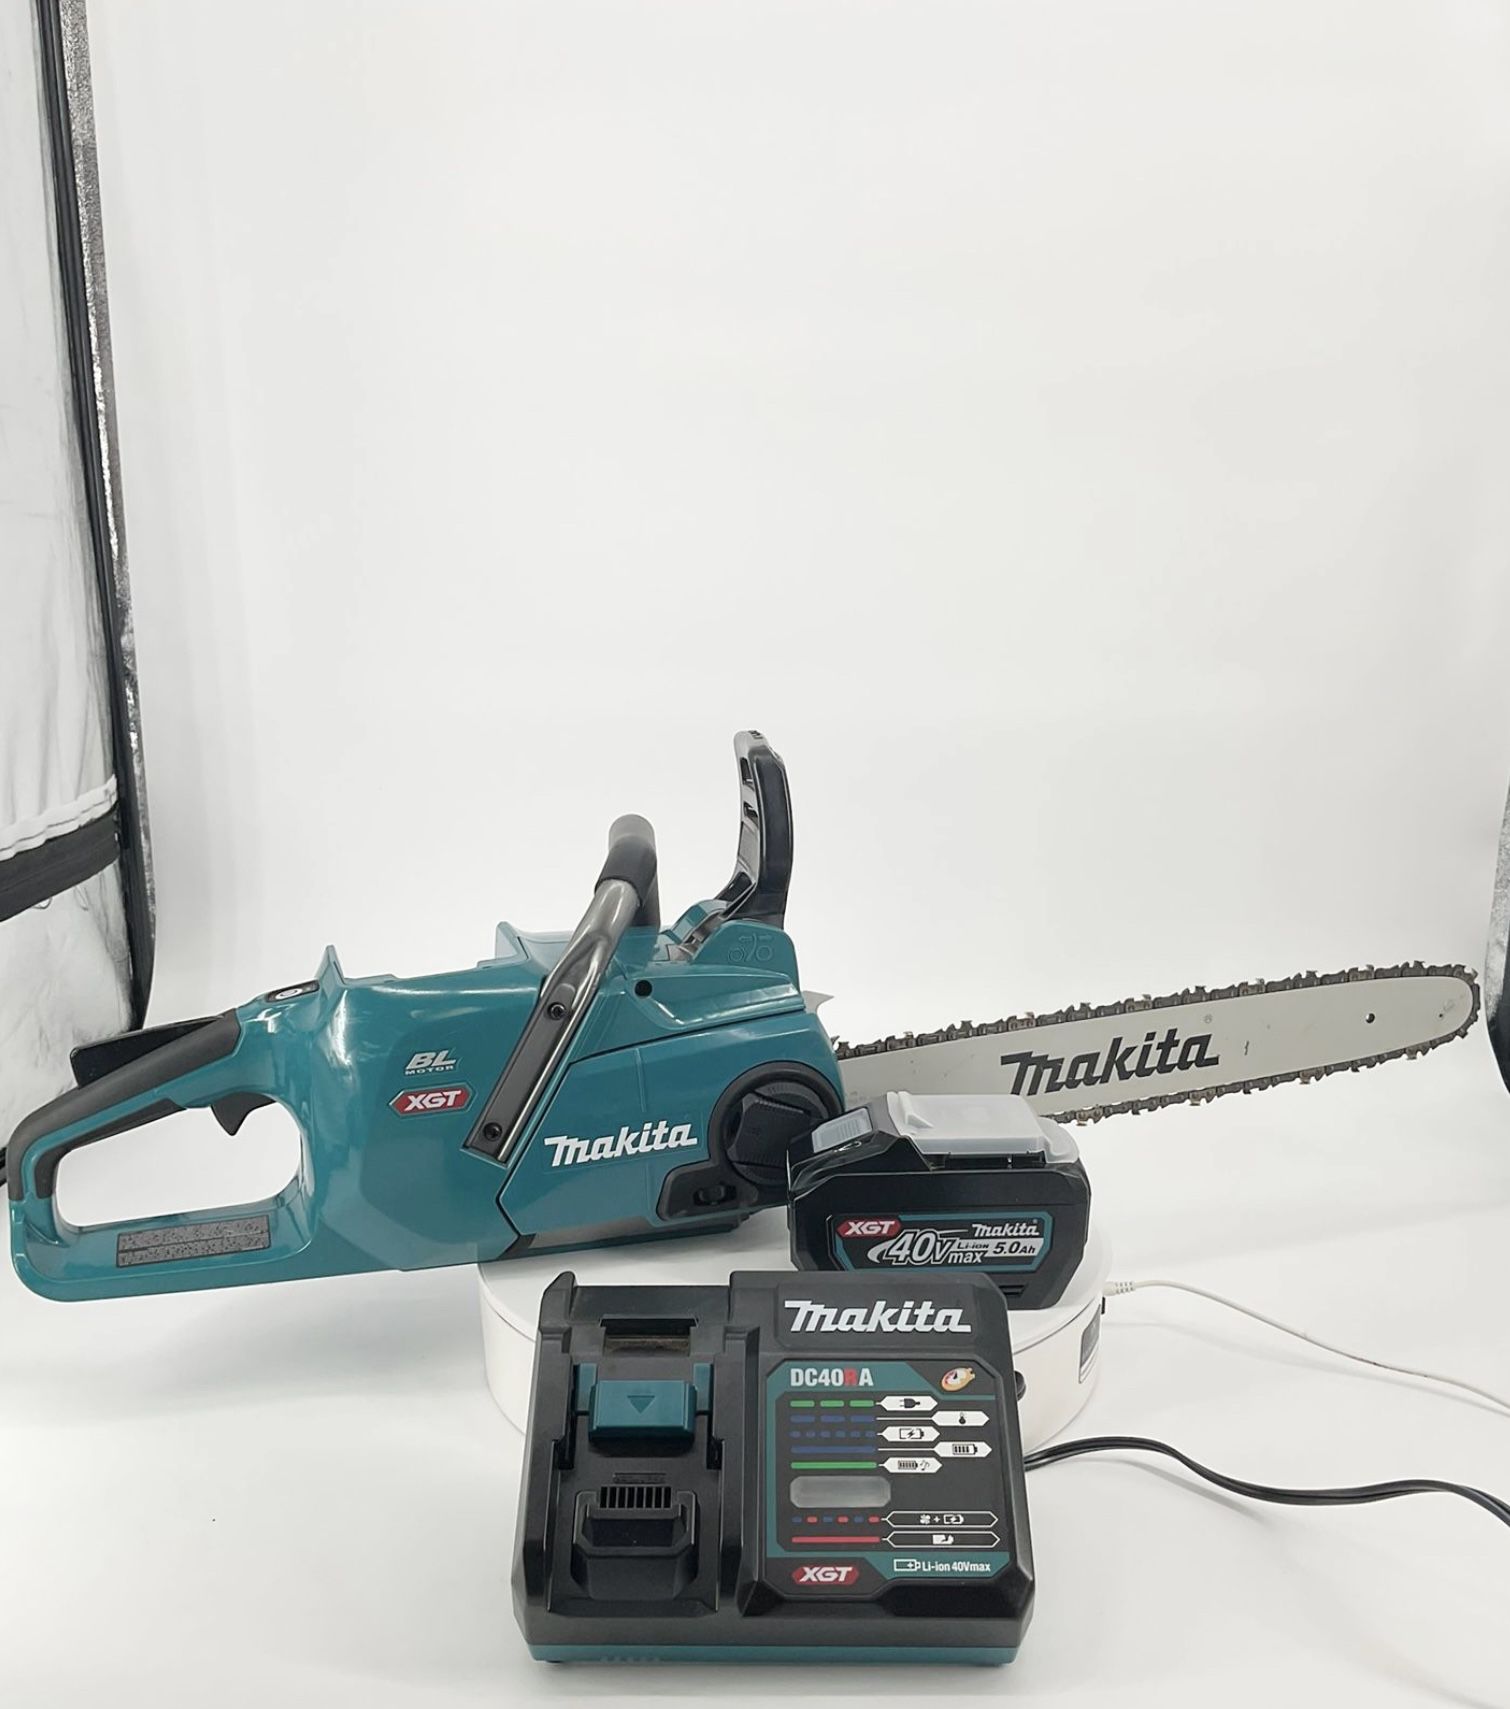 Makita XGT 18 in. 40V max Brushless Electric Cordless Battery Chainsaw Kit (5.0Ah) [USED LIKE NEW] 